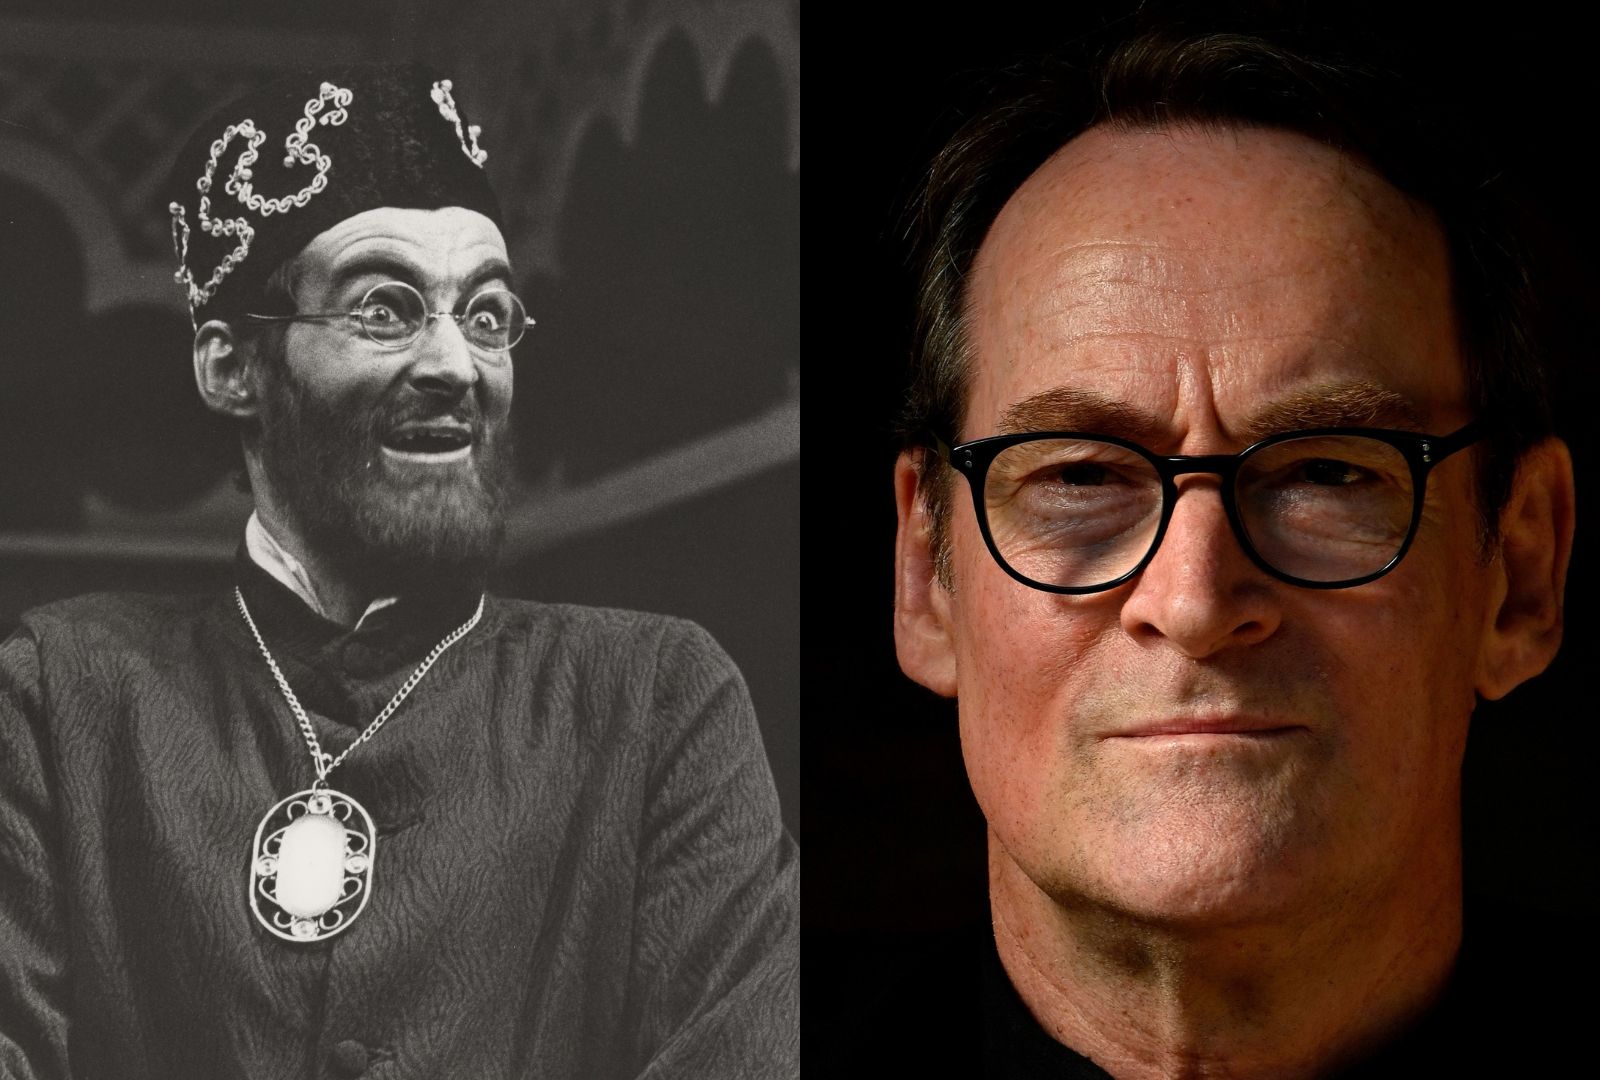 Left: Photo of Keith Robinson as Malvolio in the NIDA production of 'Twelfth Night', 1981. Photo by George Pashuk. Right: Recent headshot provided by Sue Barnett & Associates. Photo by David Dare Parker.